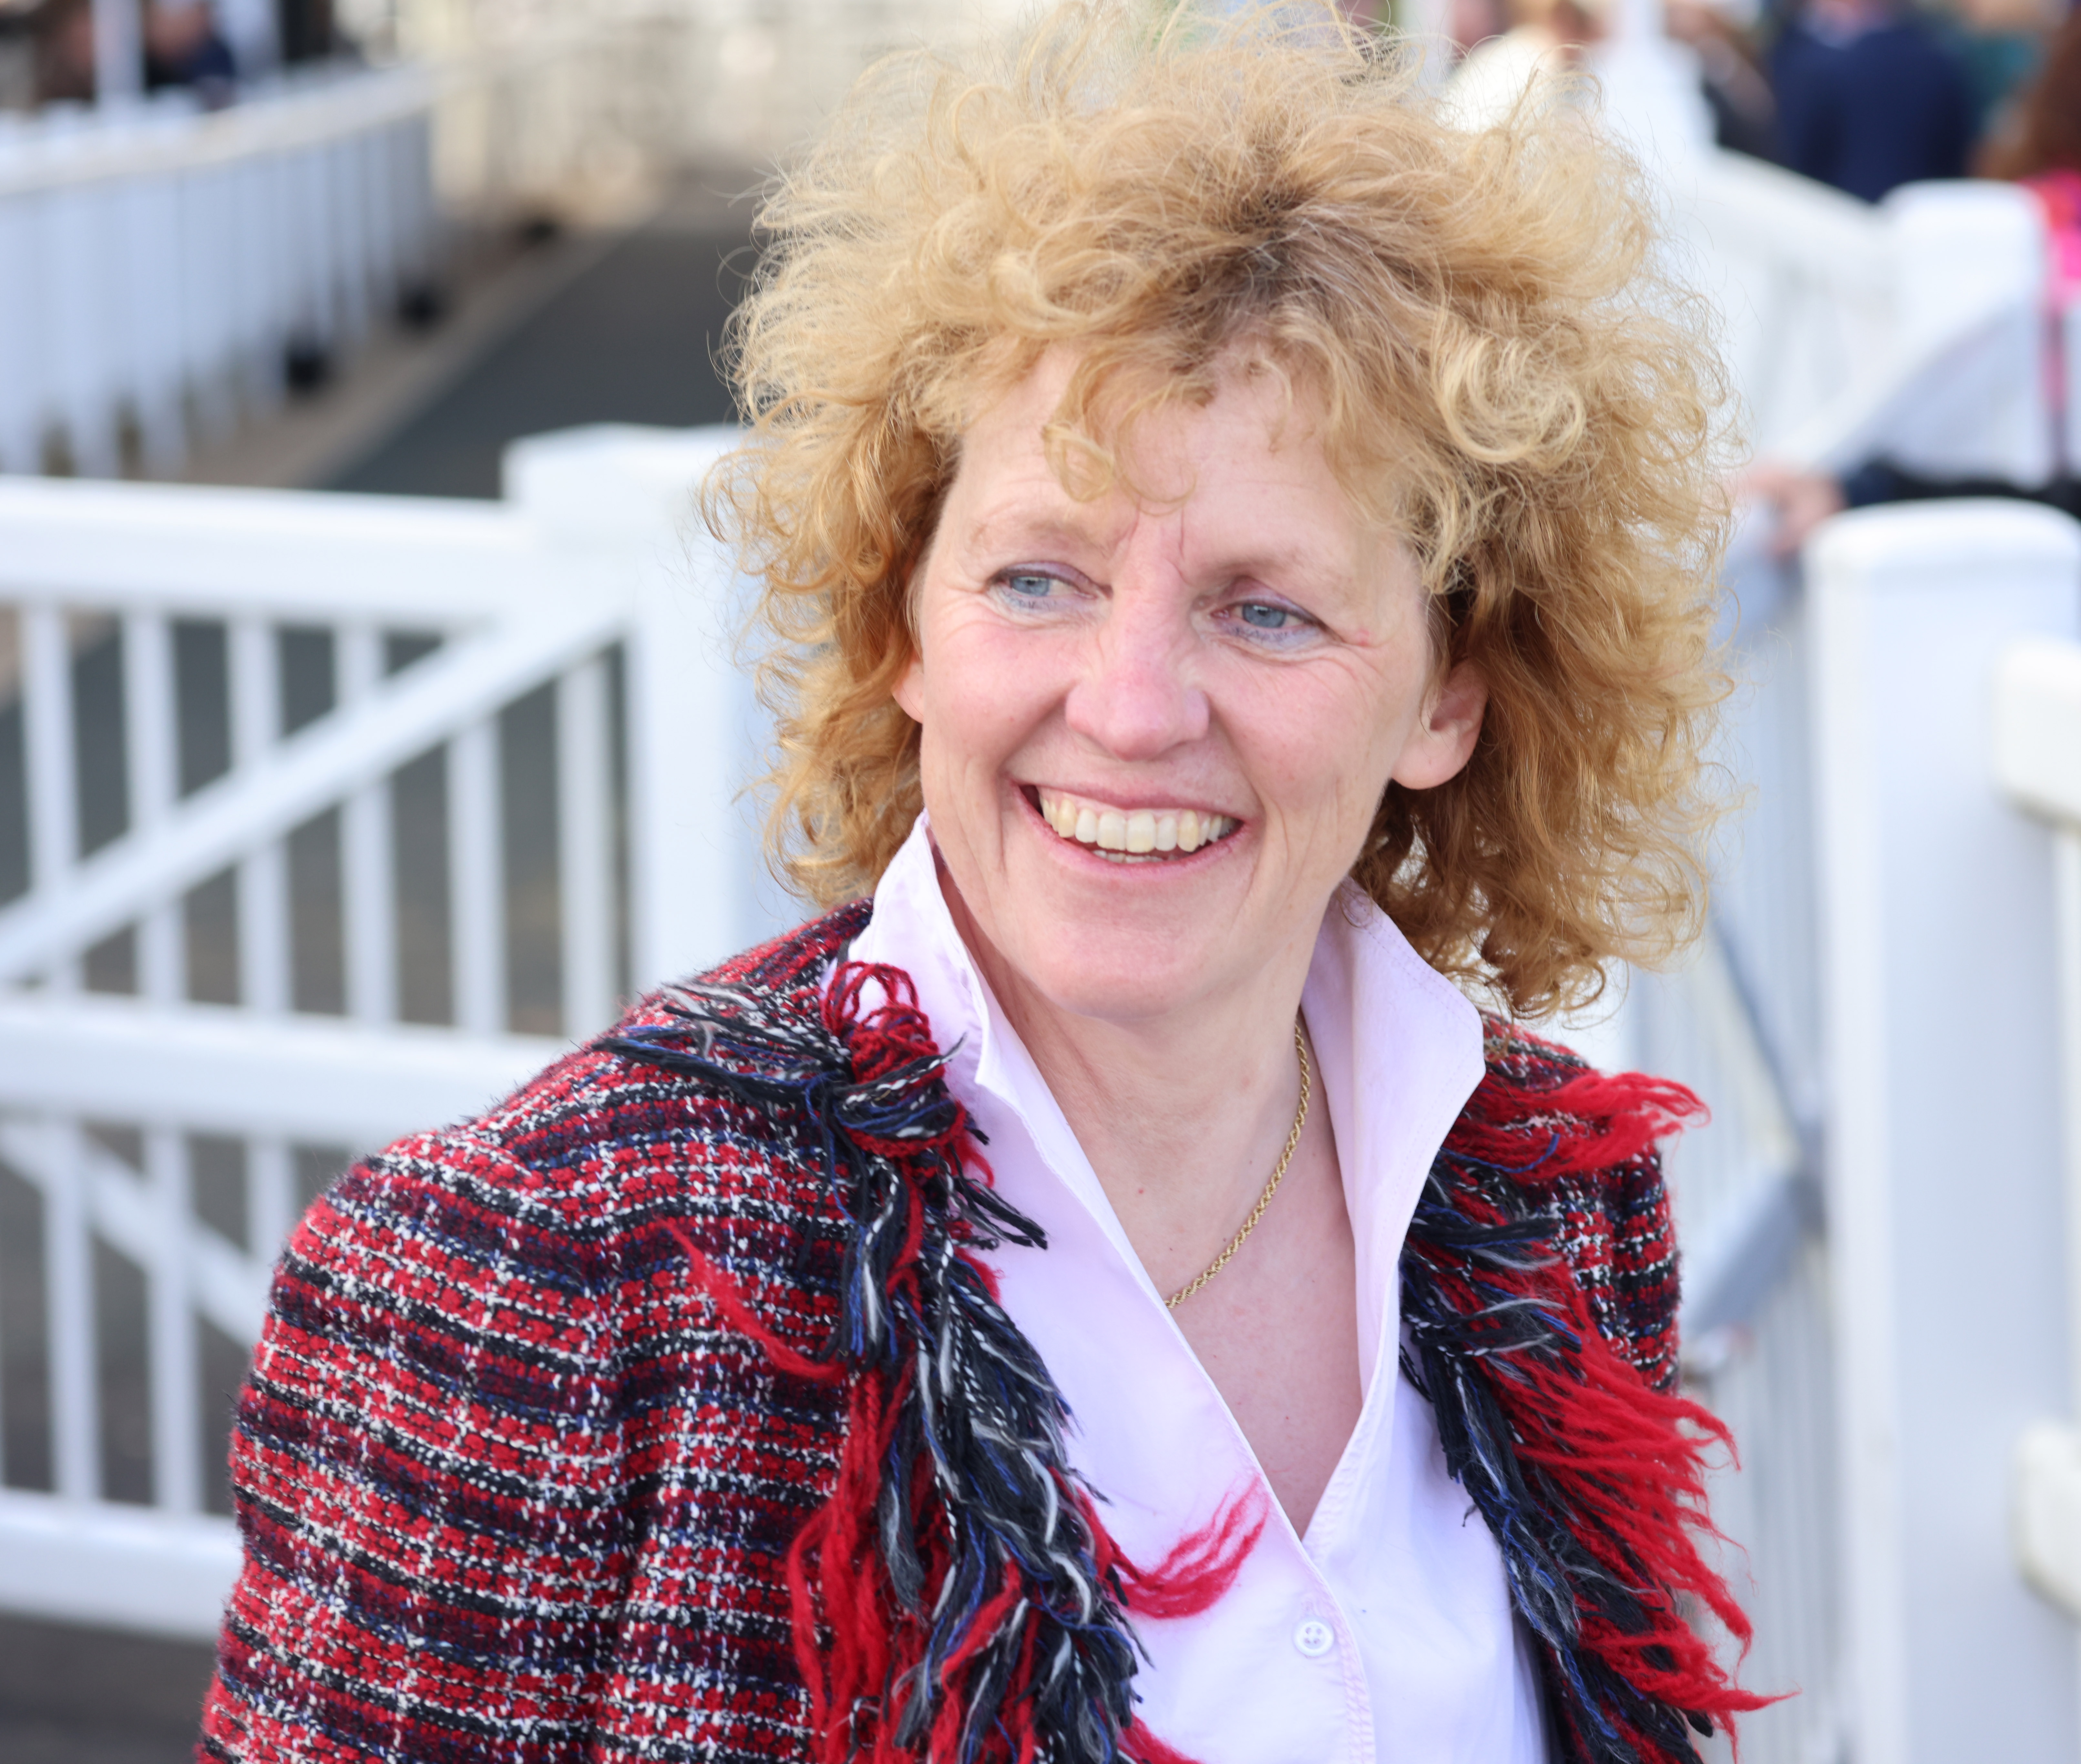 Lucinda Russell films content for Bet365 ahead of The Festival